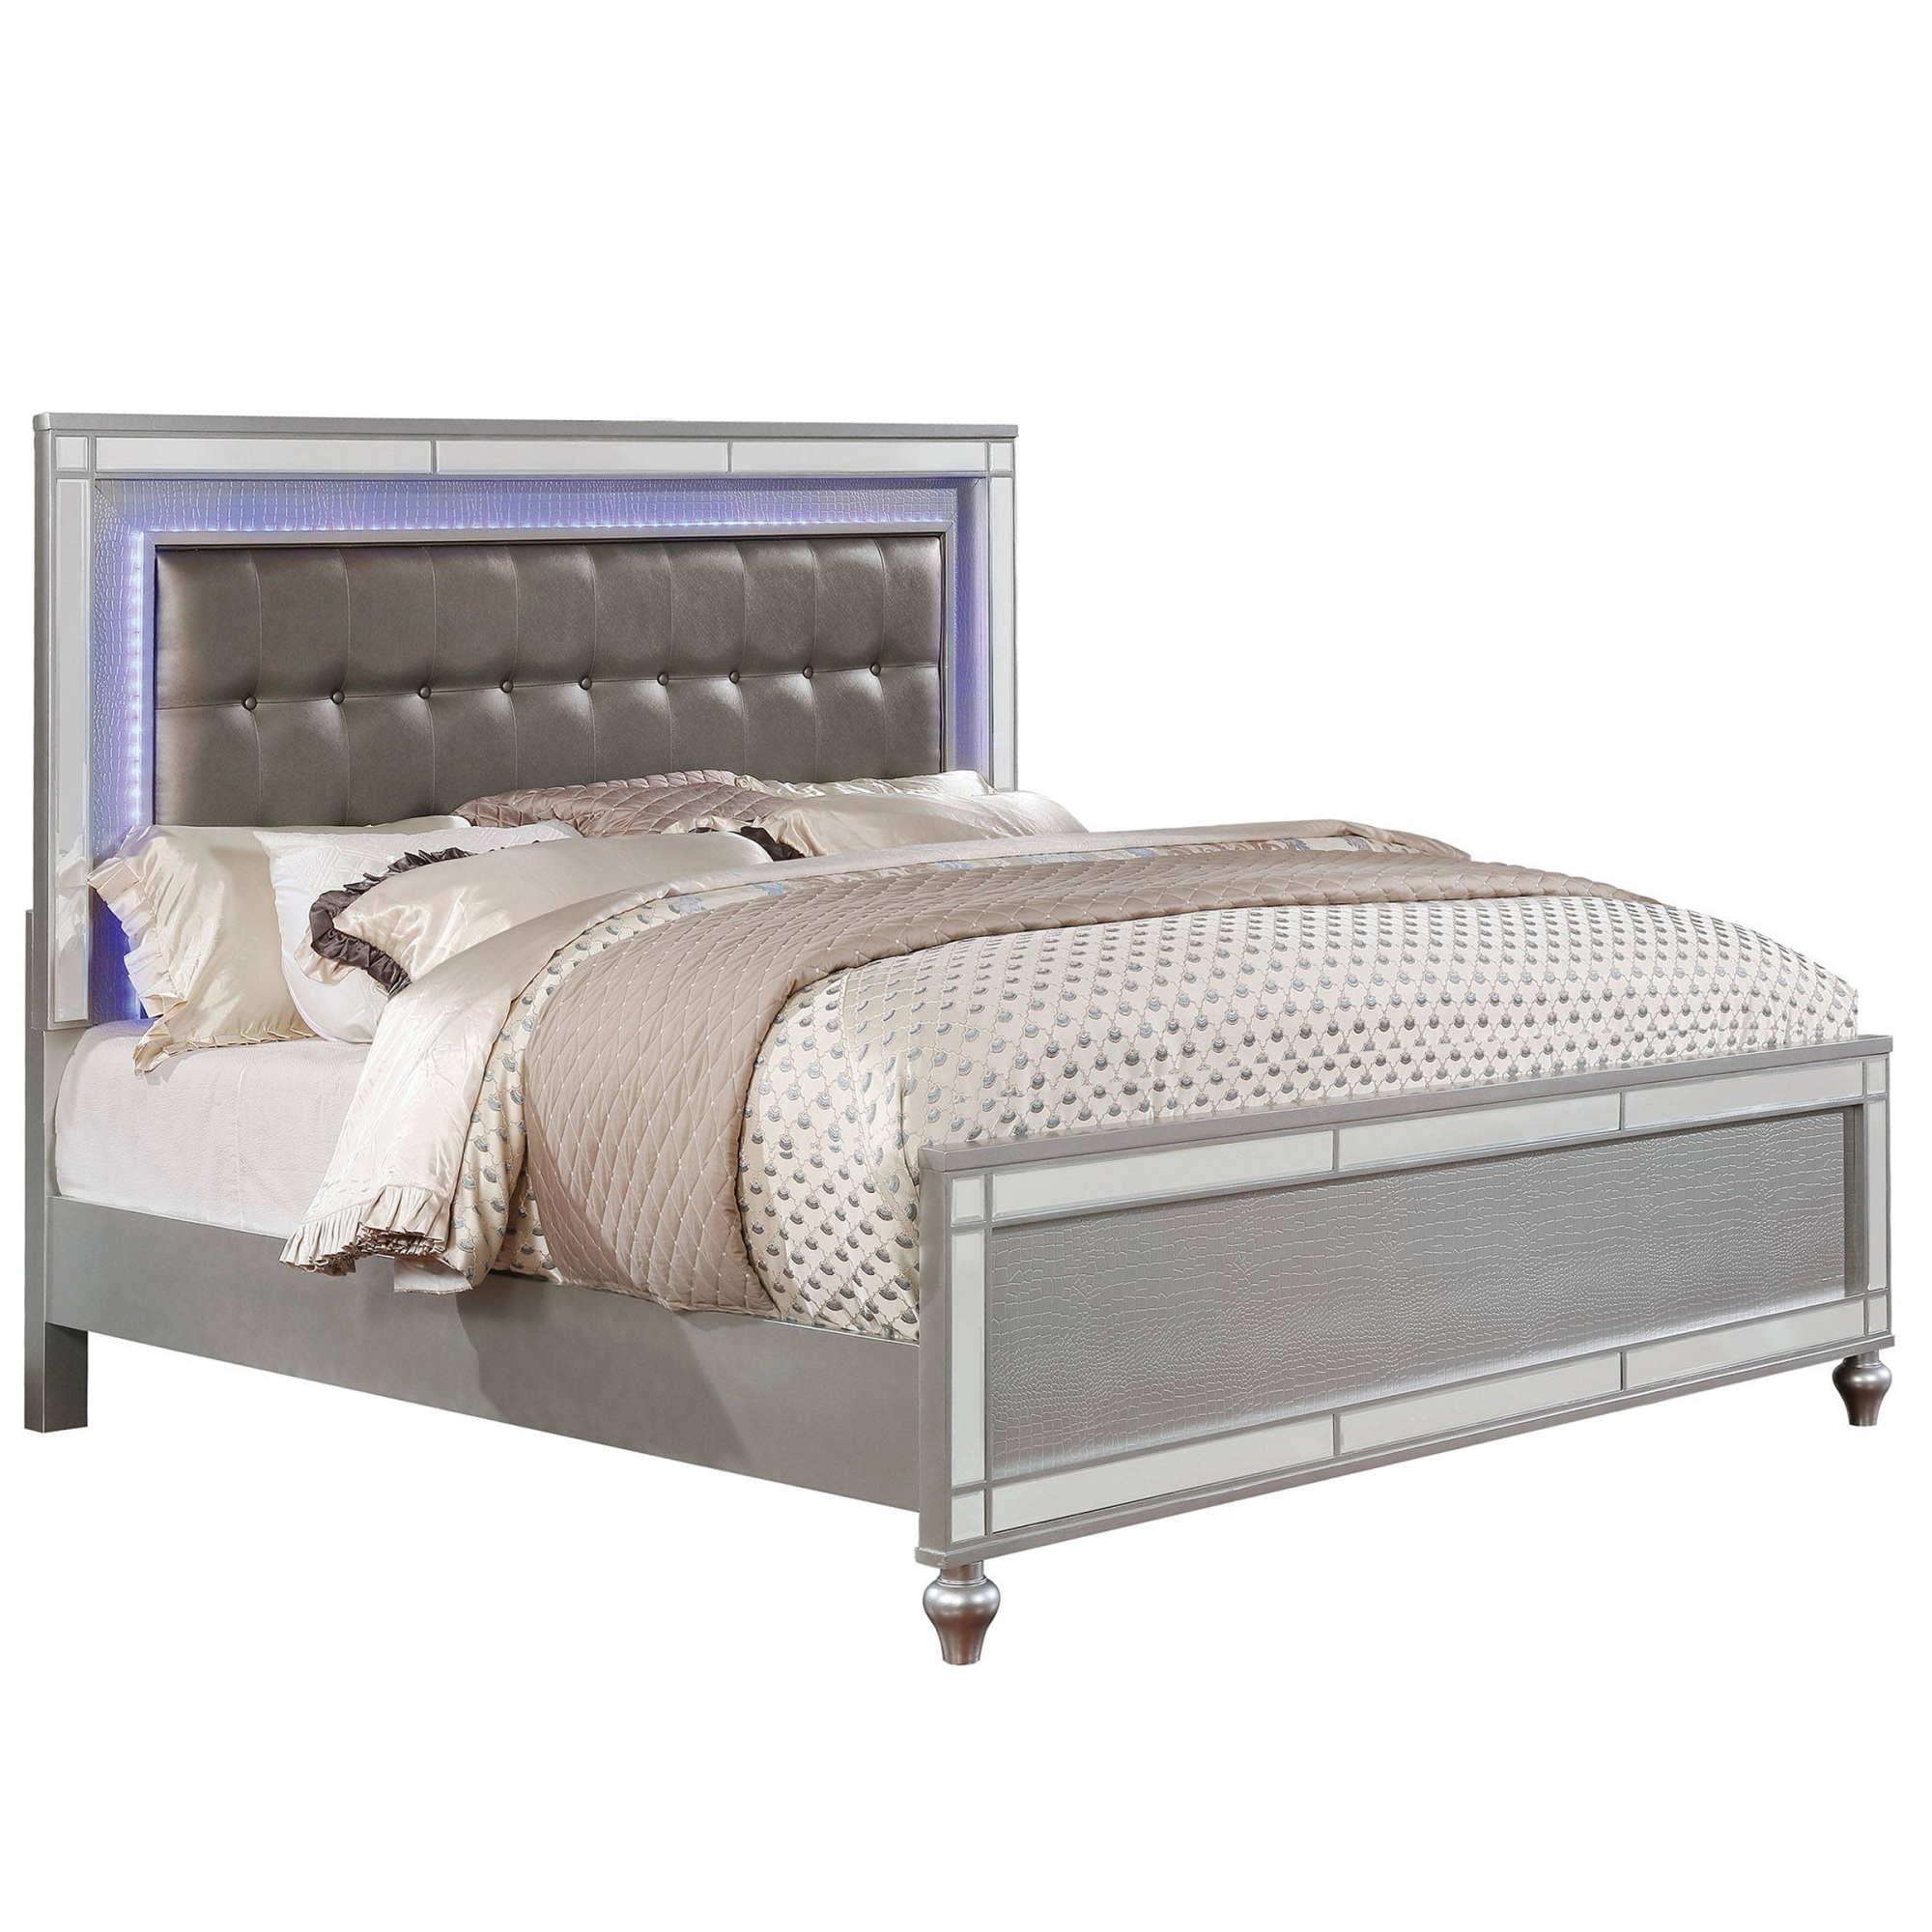 Contemporary Button Tufted California King Bed with Ornate Bun Feet,Silver - image 1 of 5